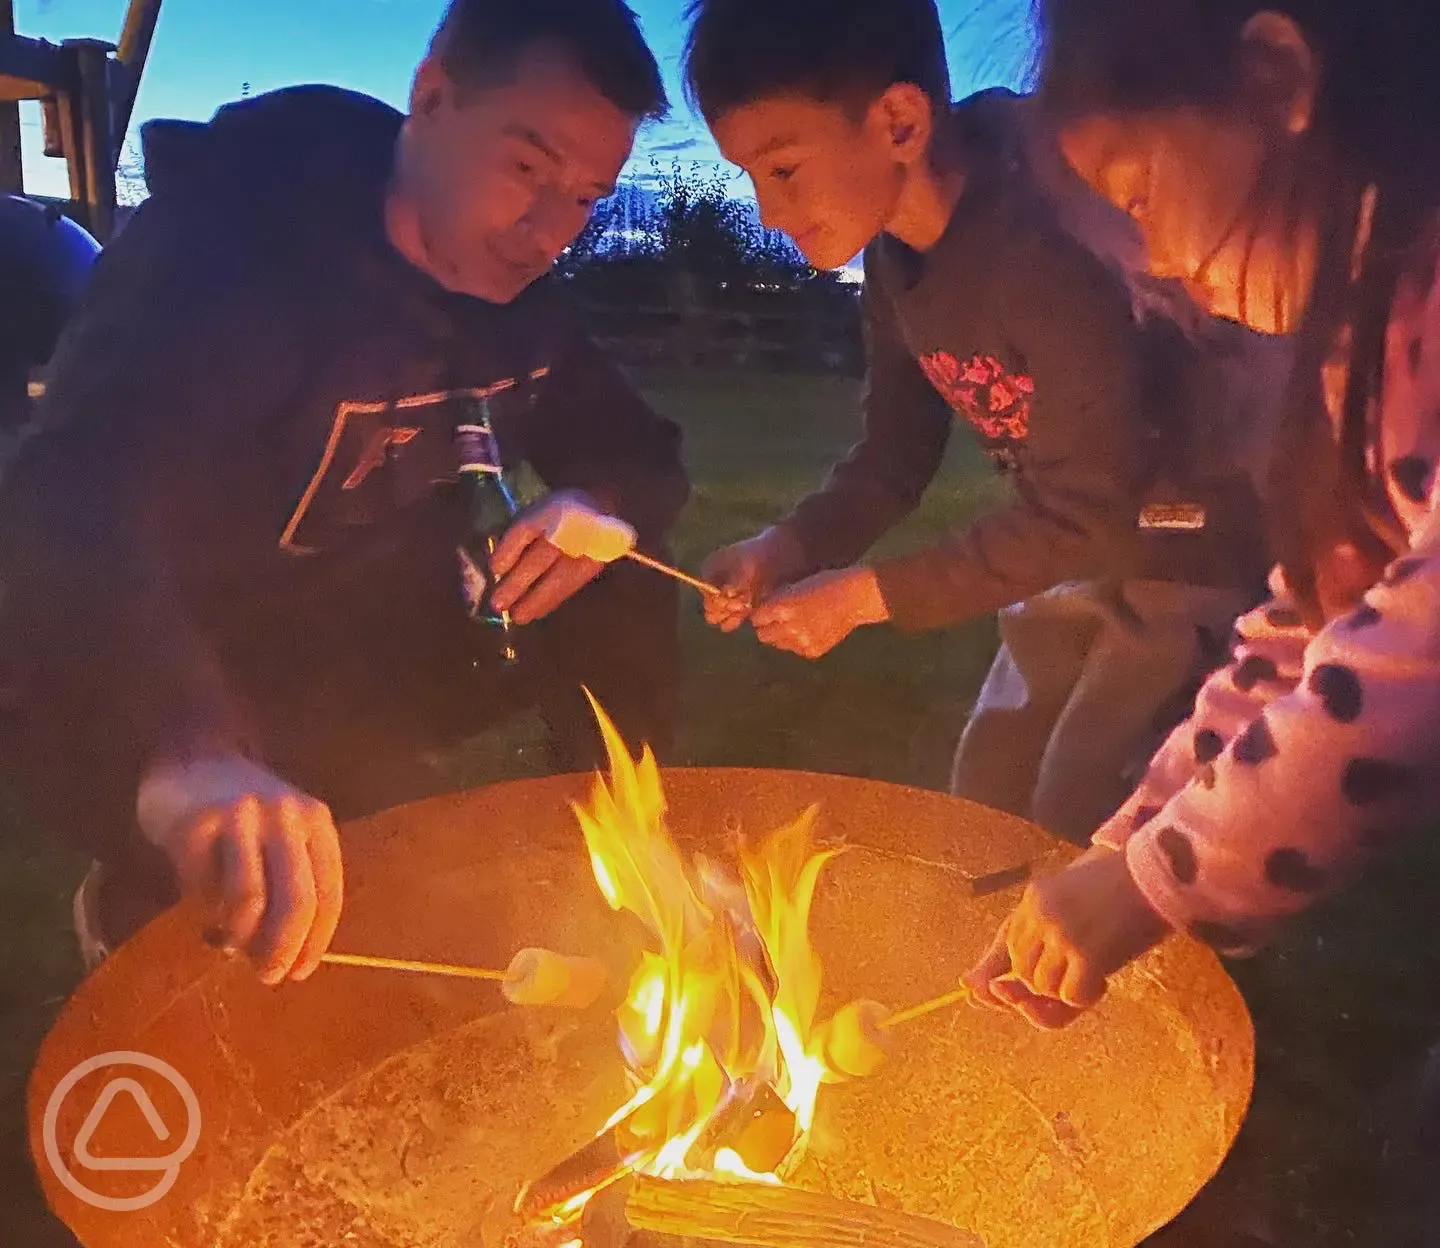 Toasting marshmellows on the campfire